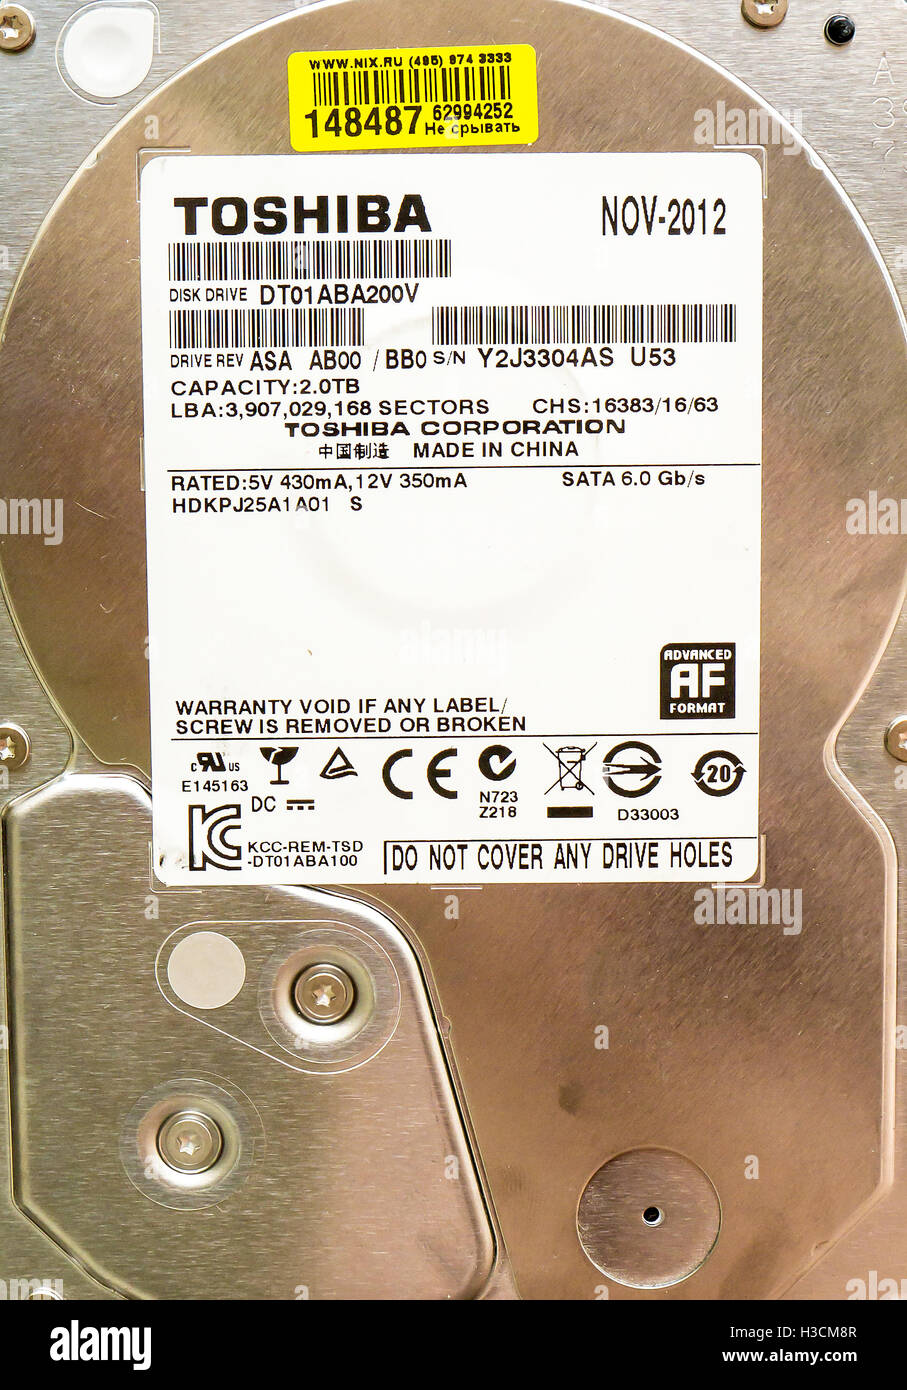 2TB HDD Toshiba DT01ABA200V. Toshiba Corporation is a Japanese multinational conglomerate corporation headquartered in Japan. Stock Photo